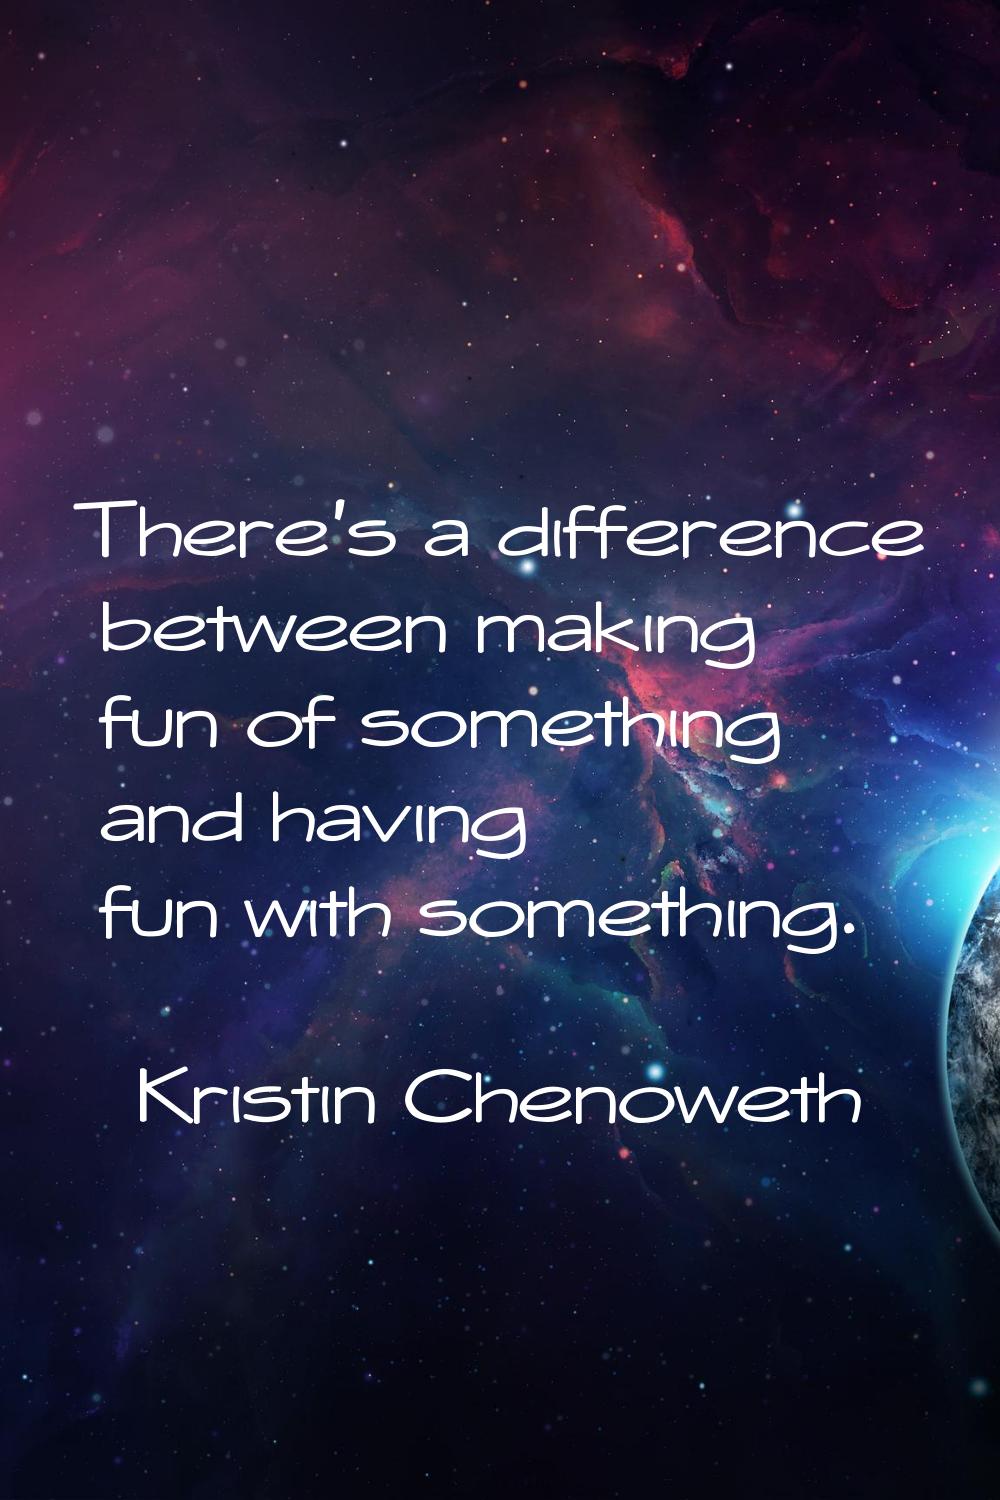 There's a difference between making fun of something and having fun with something.